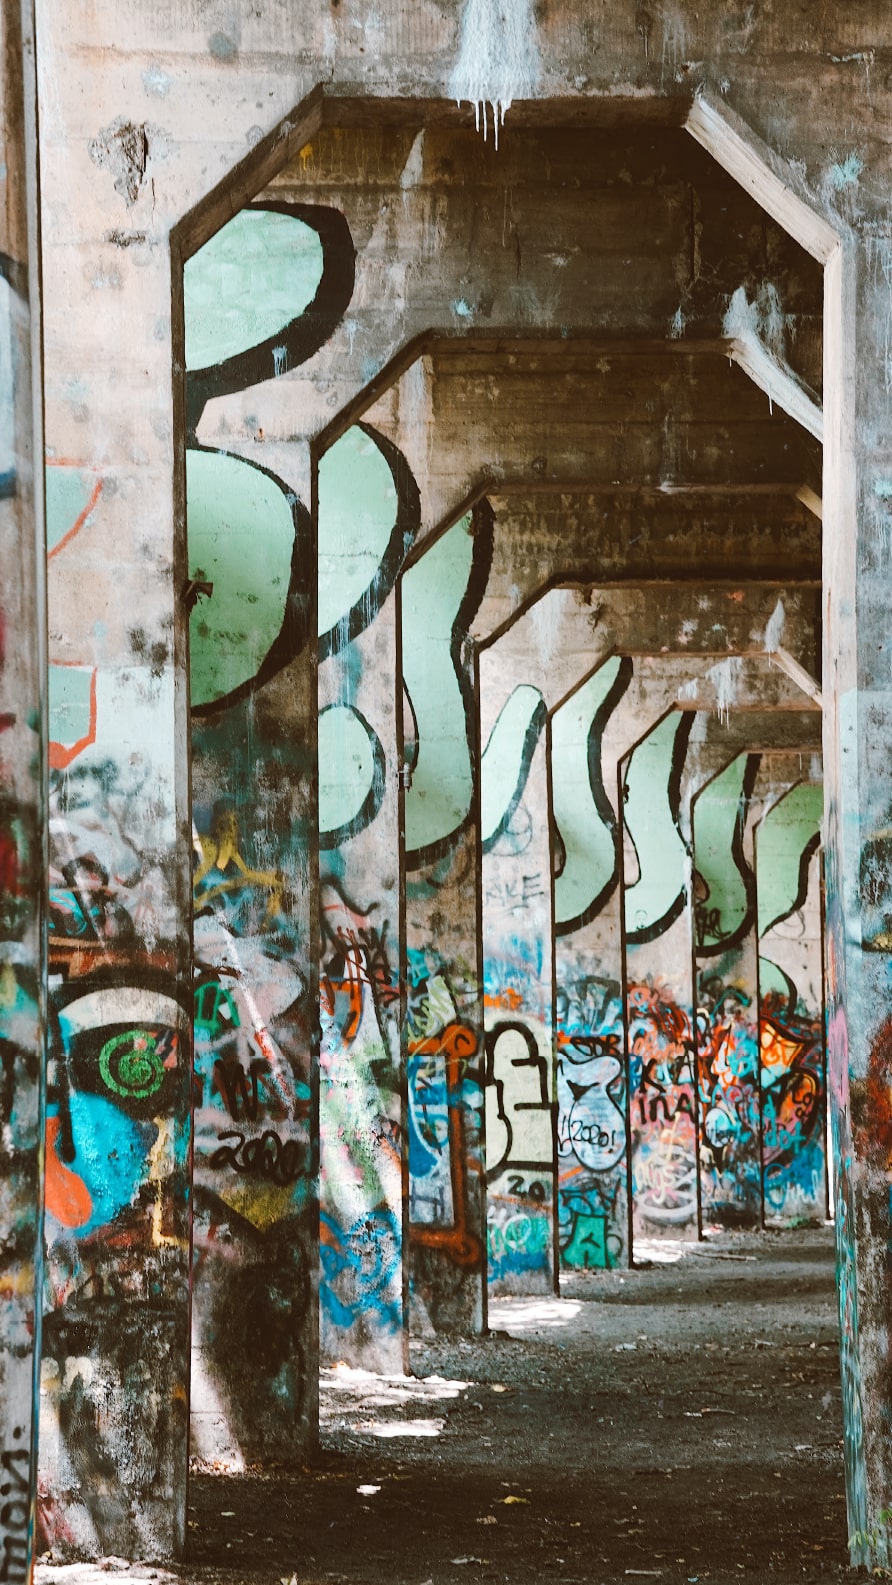 iPhone wallpapers featuring graffiti